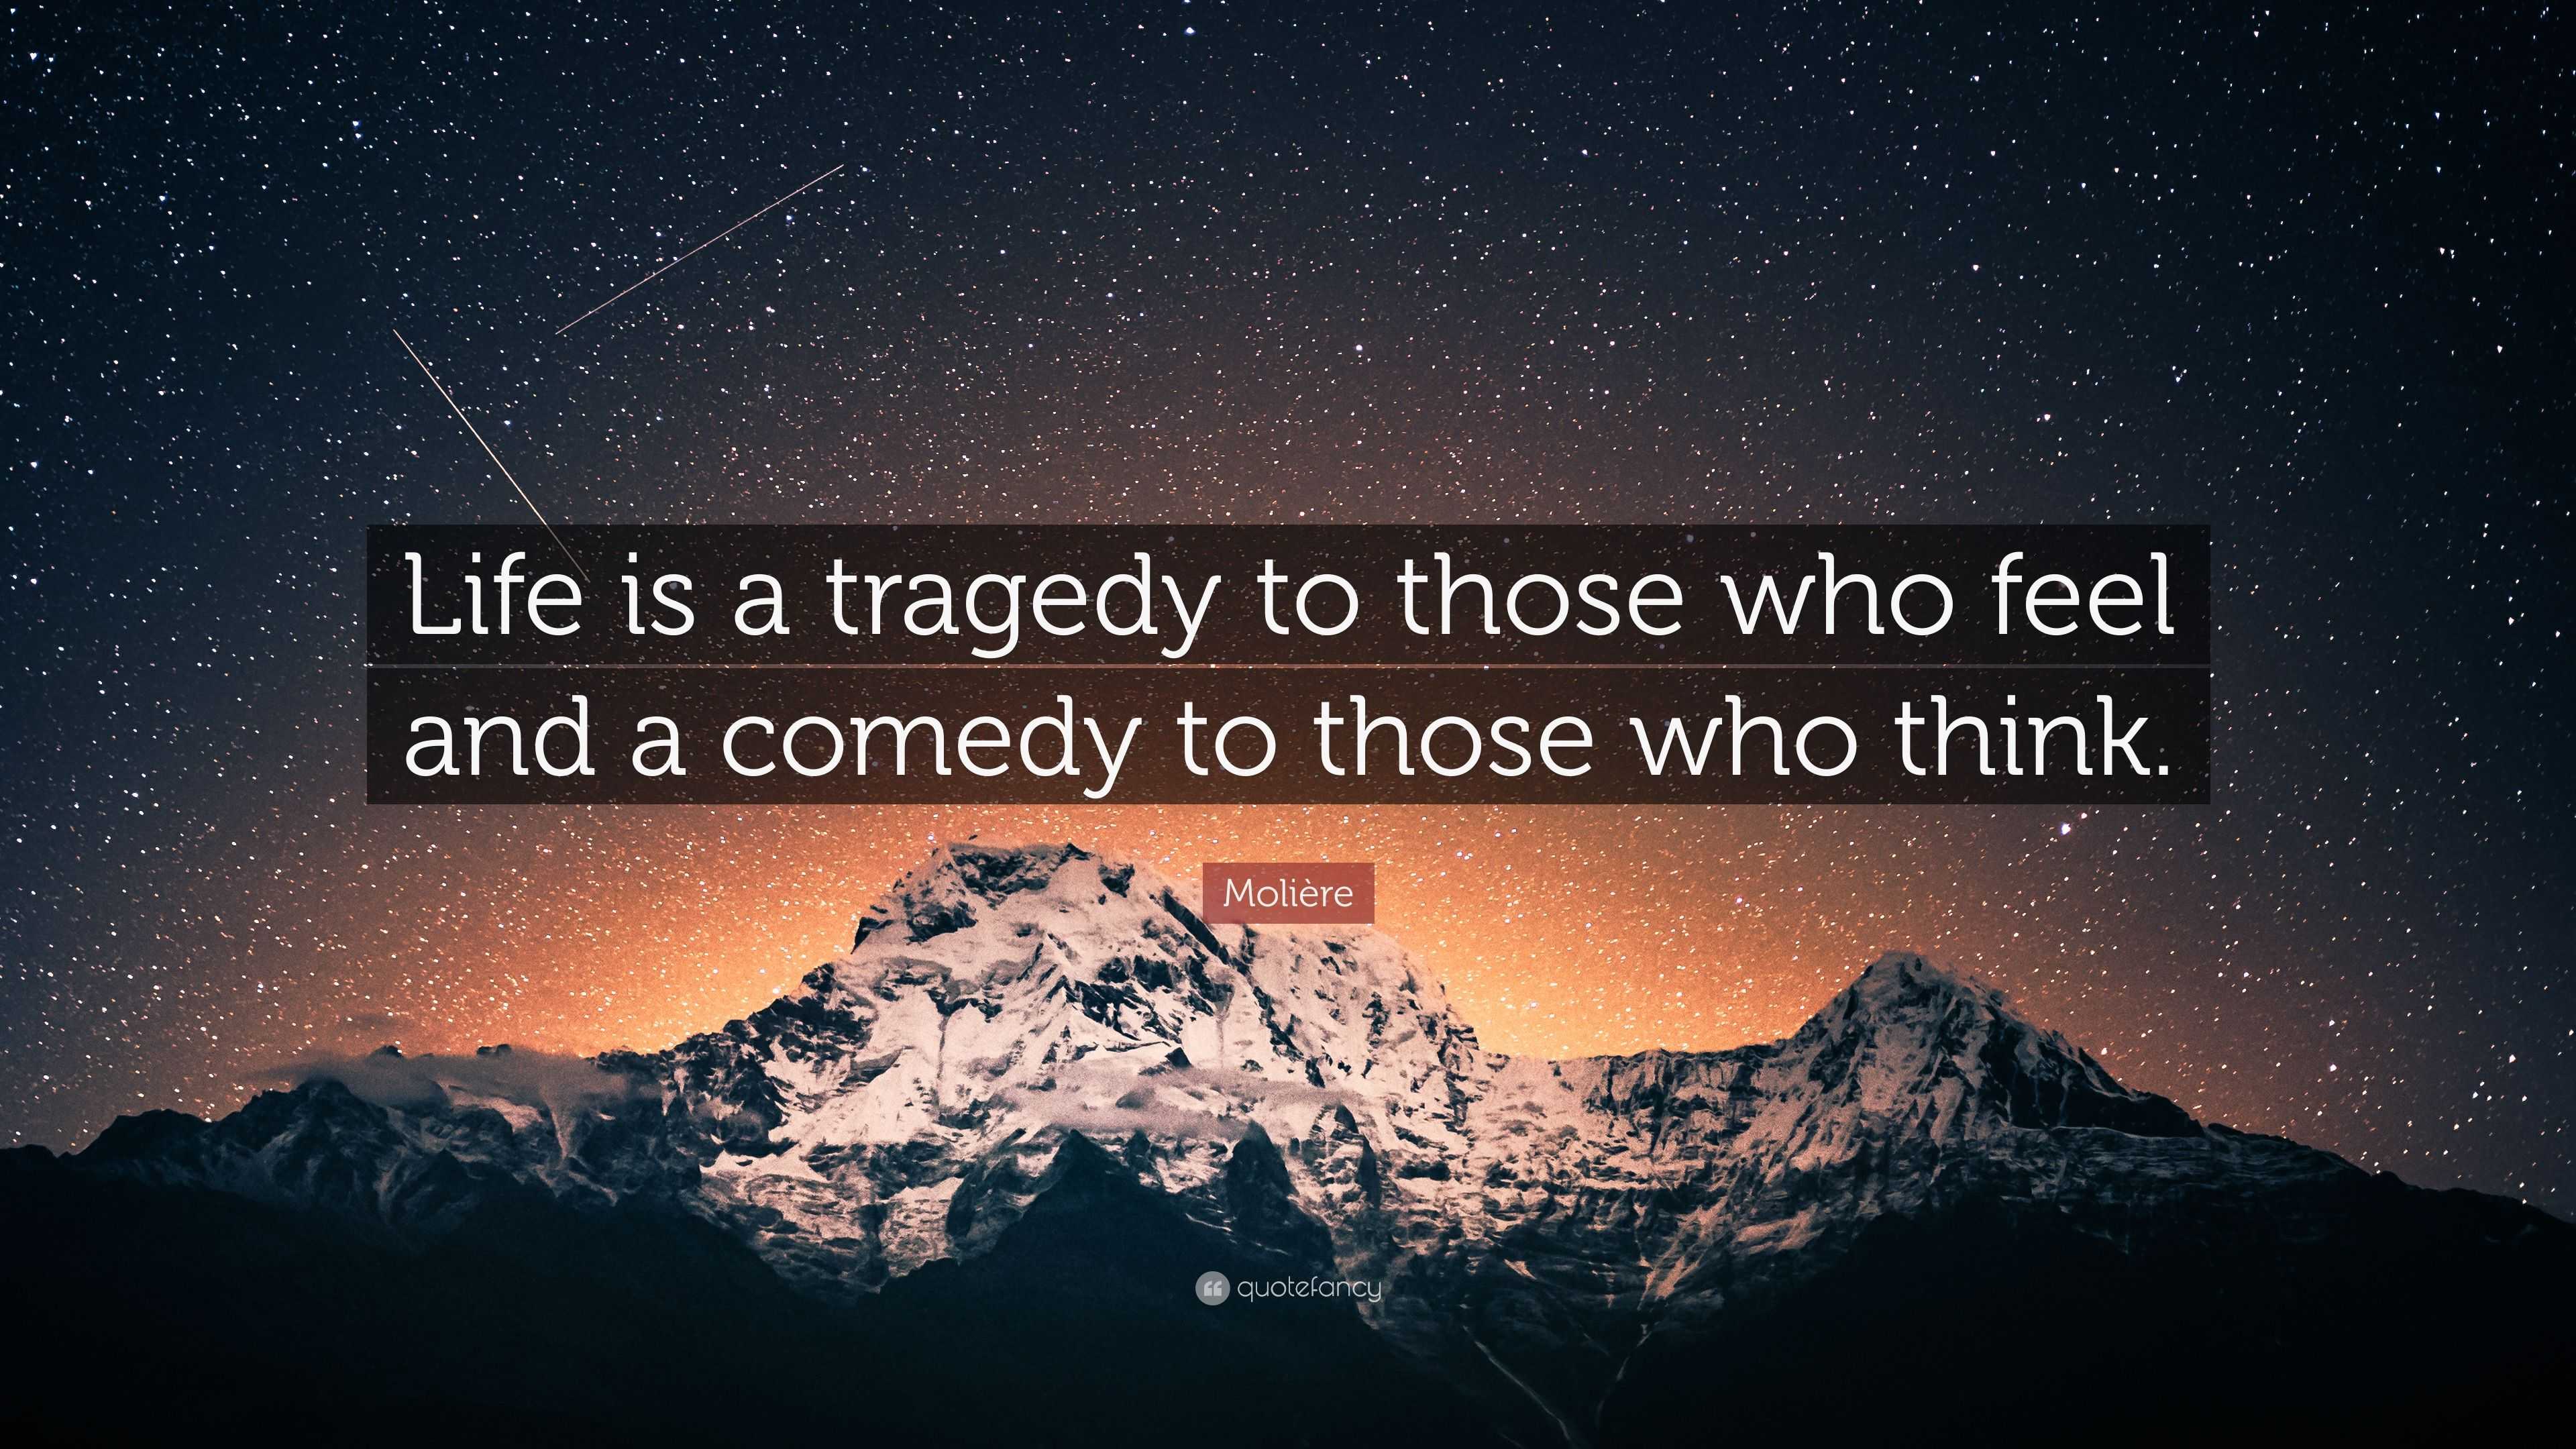 Molière Quote: "Life is a tragedy to those who feel and a comedy to those who think." (12 ...